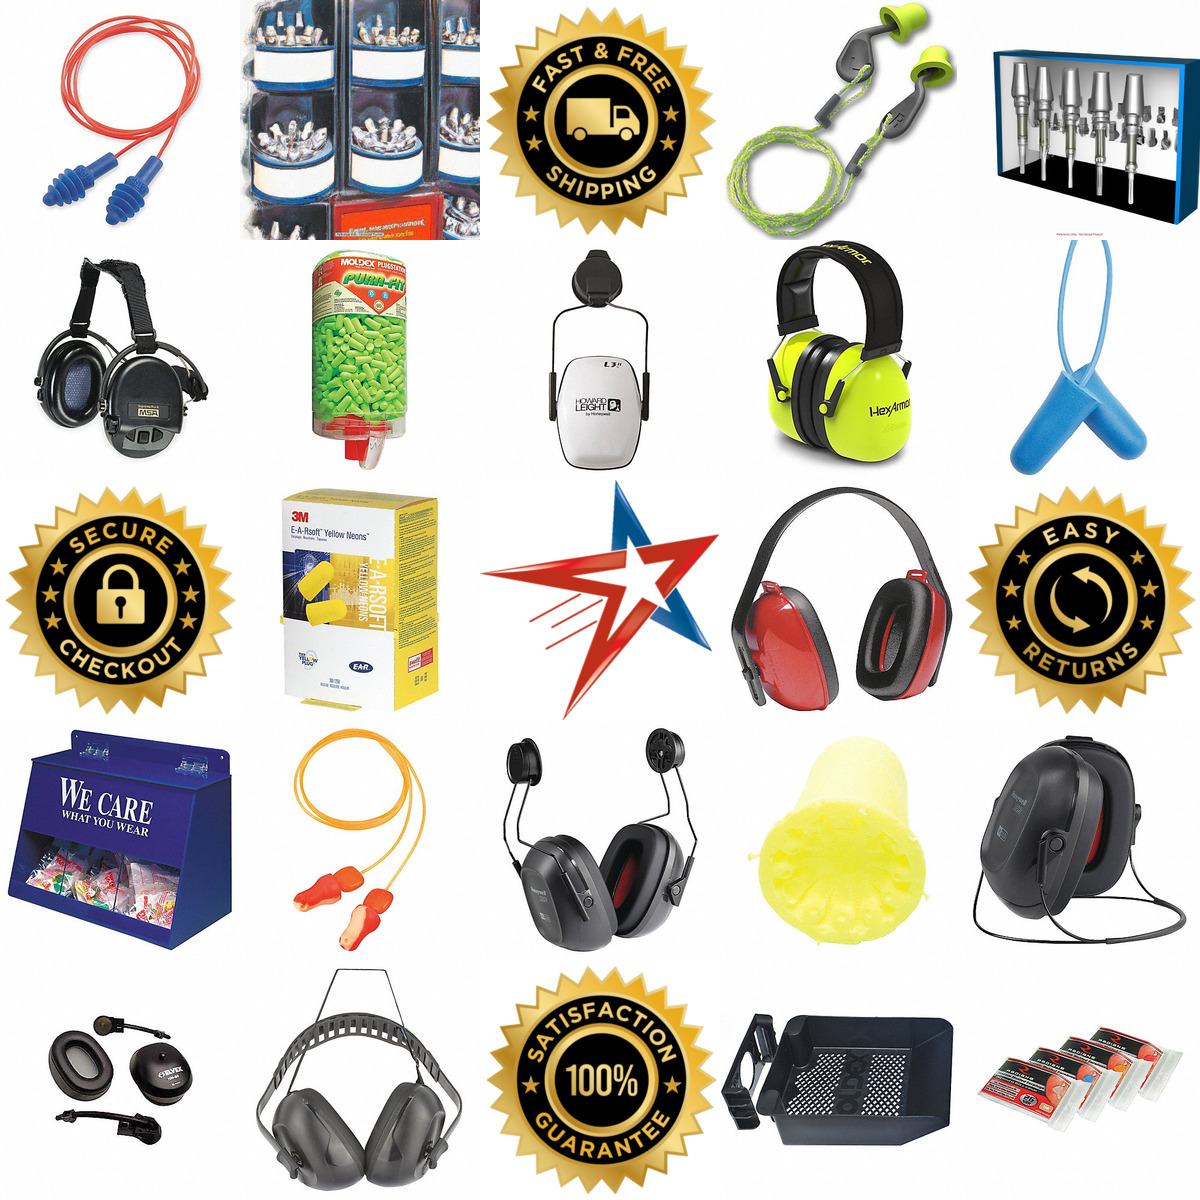 A selection of Hearing Protection products on GoVets